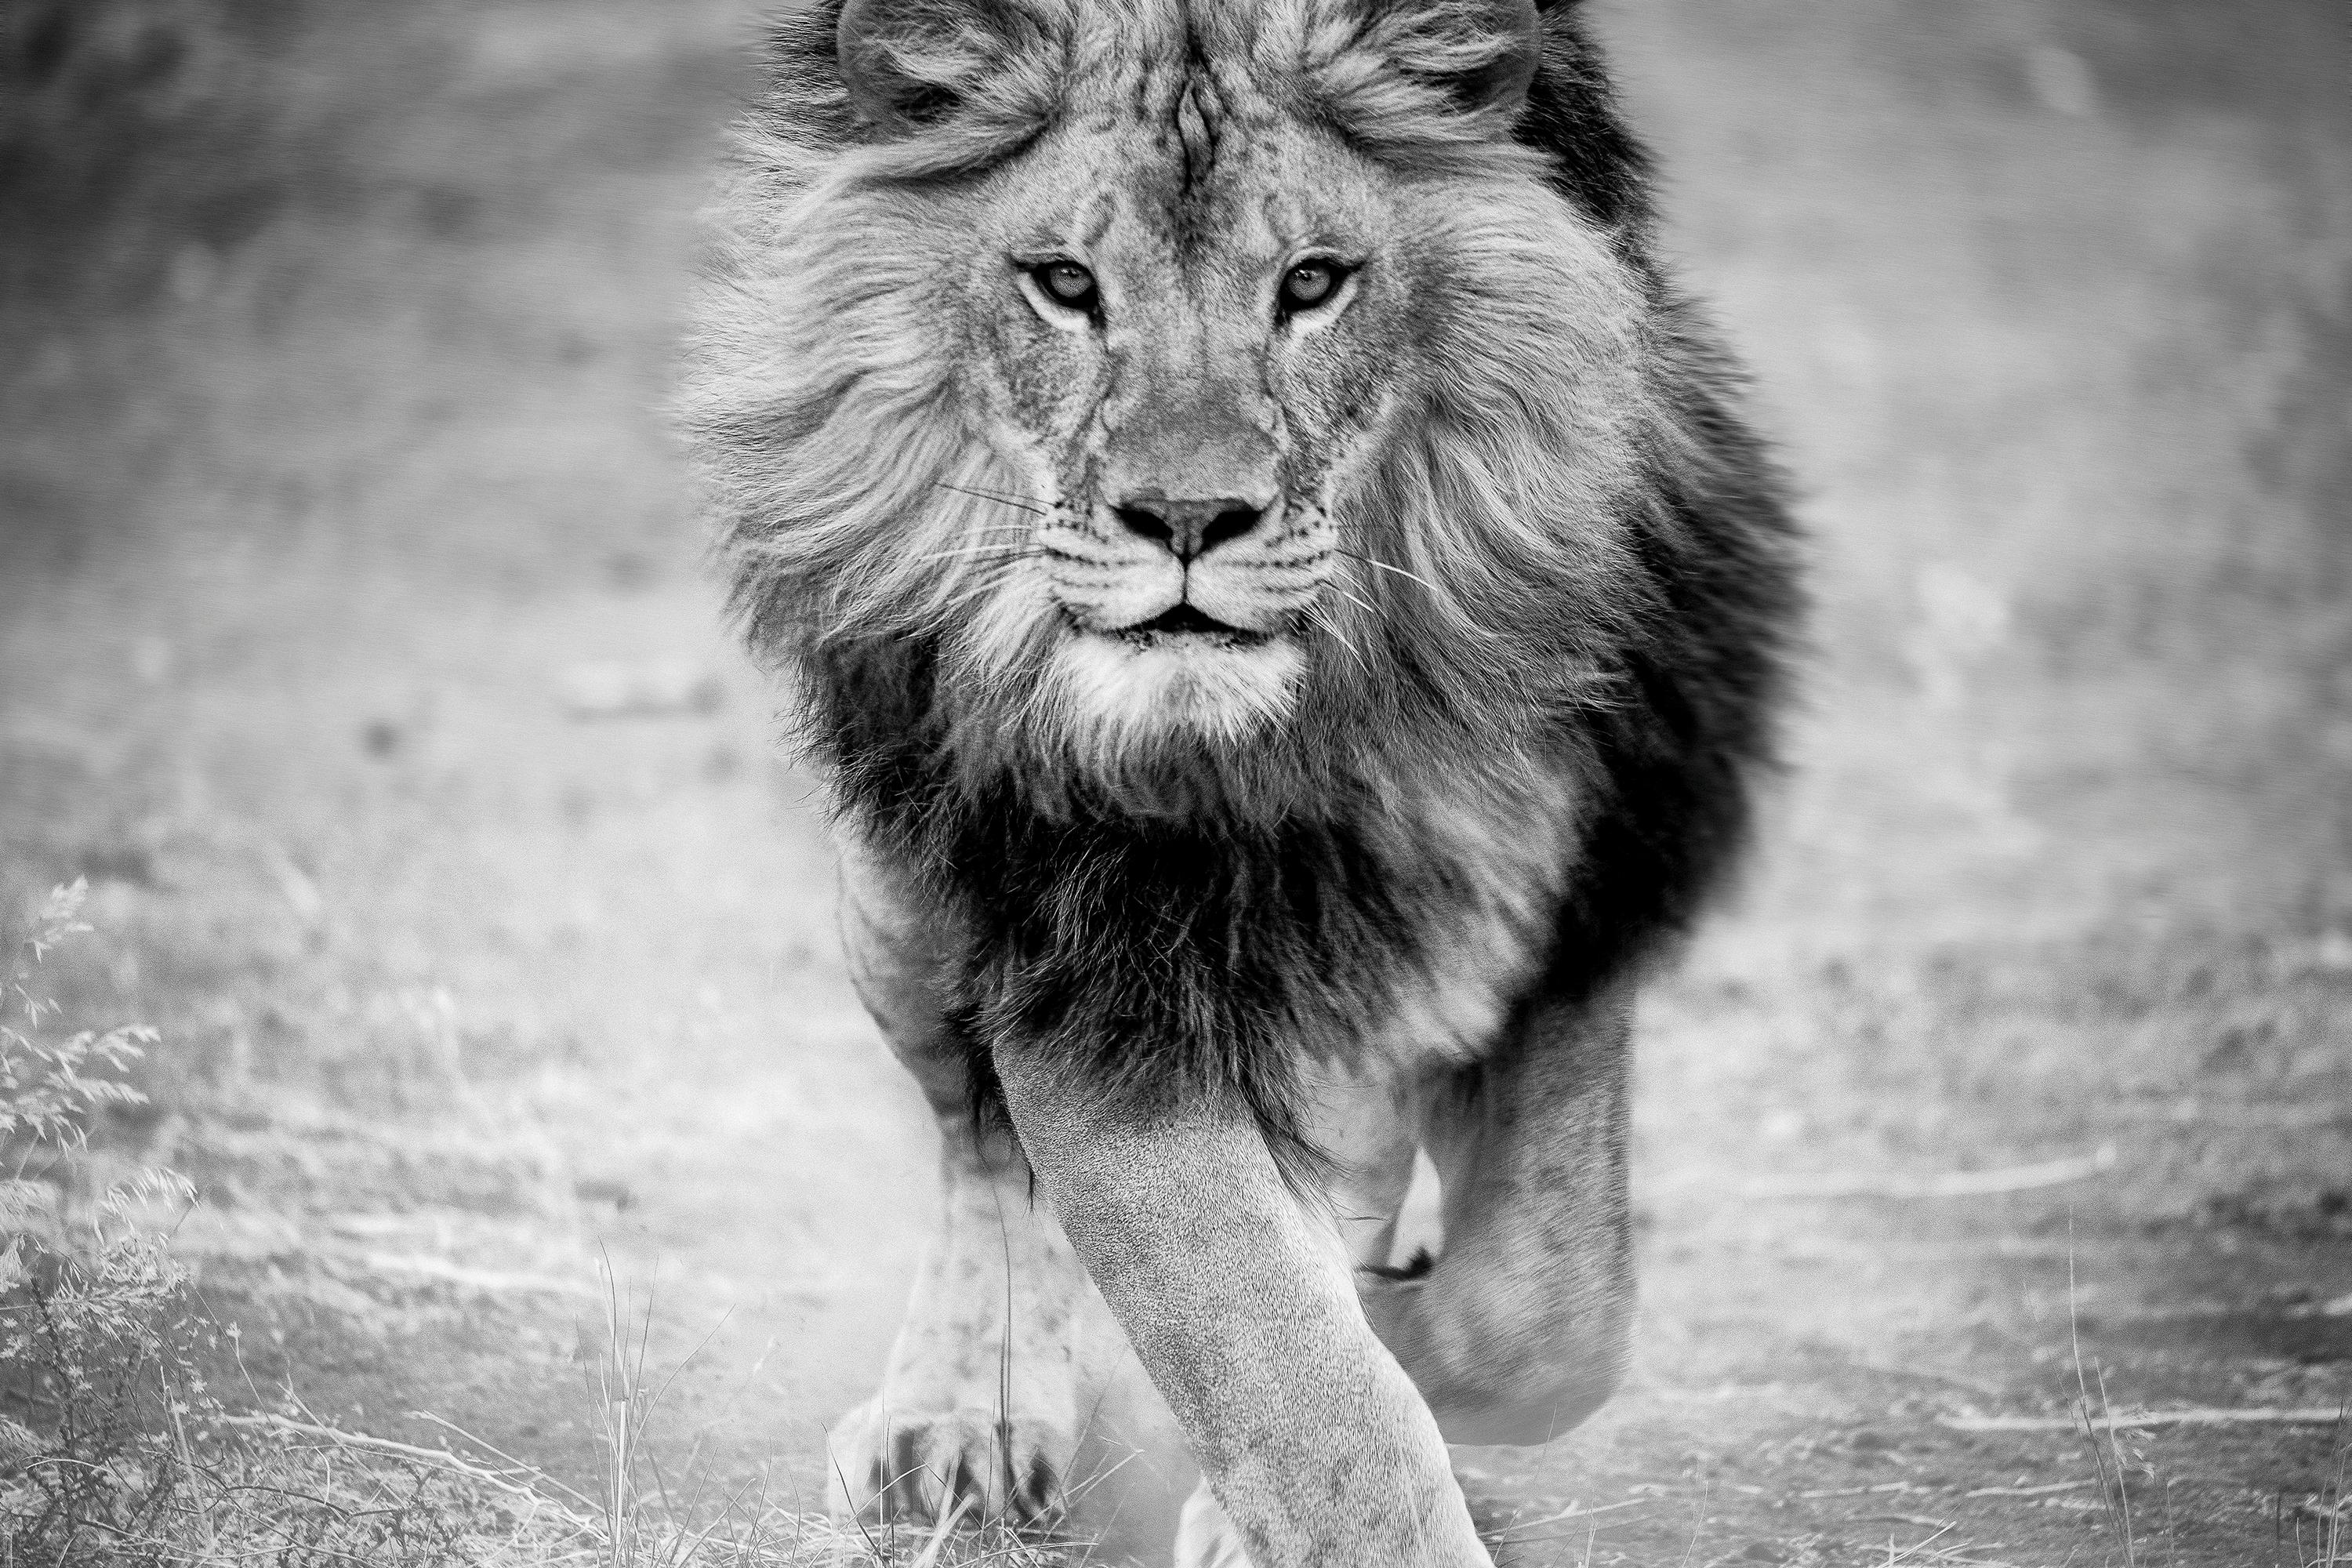 Shane Russeck Black and White Photograph - Lion Photograph "Panthera Leo" 24x36 - Black & White Photography, Unsigned Print